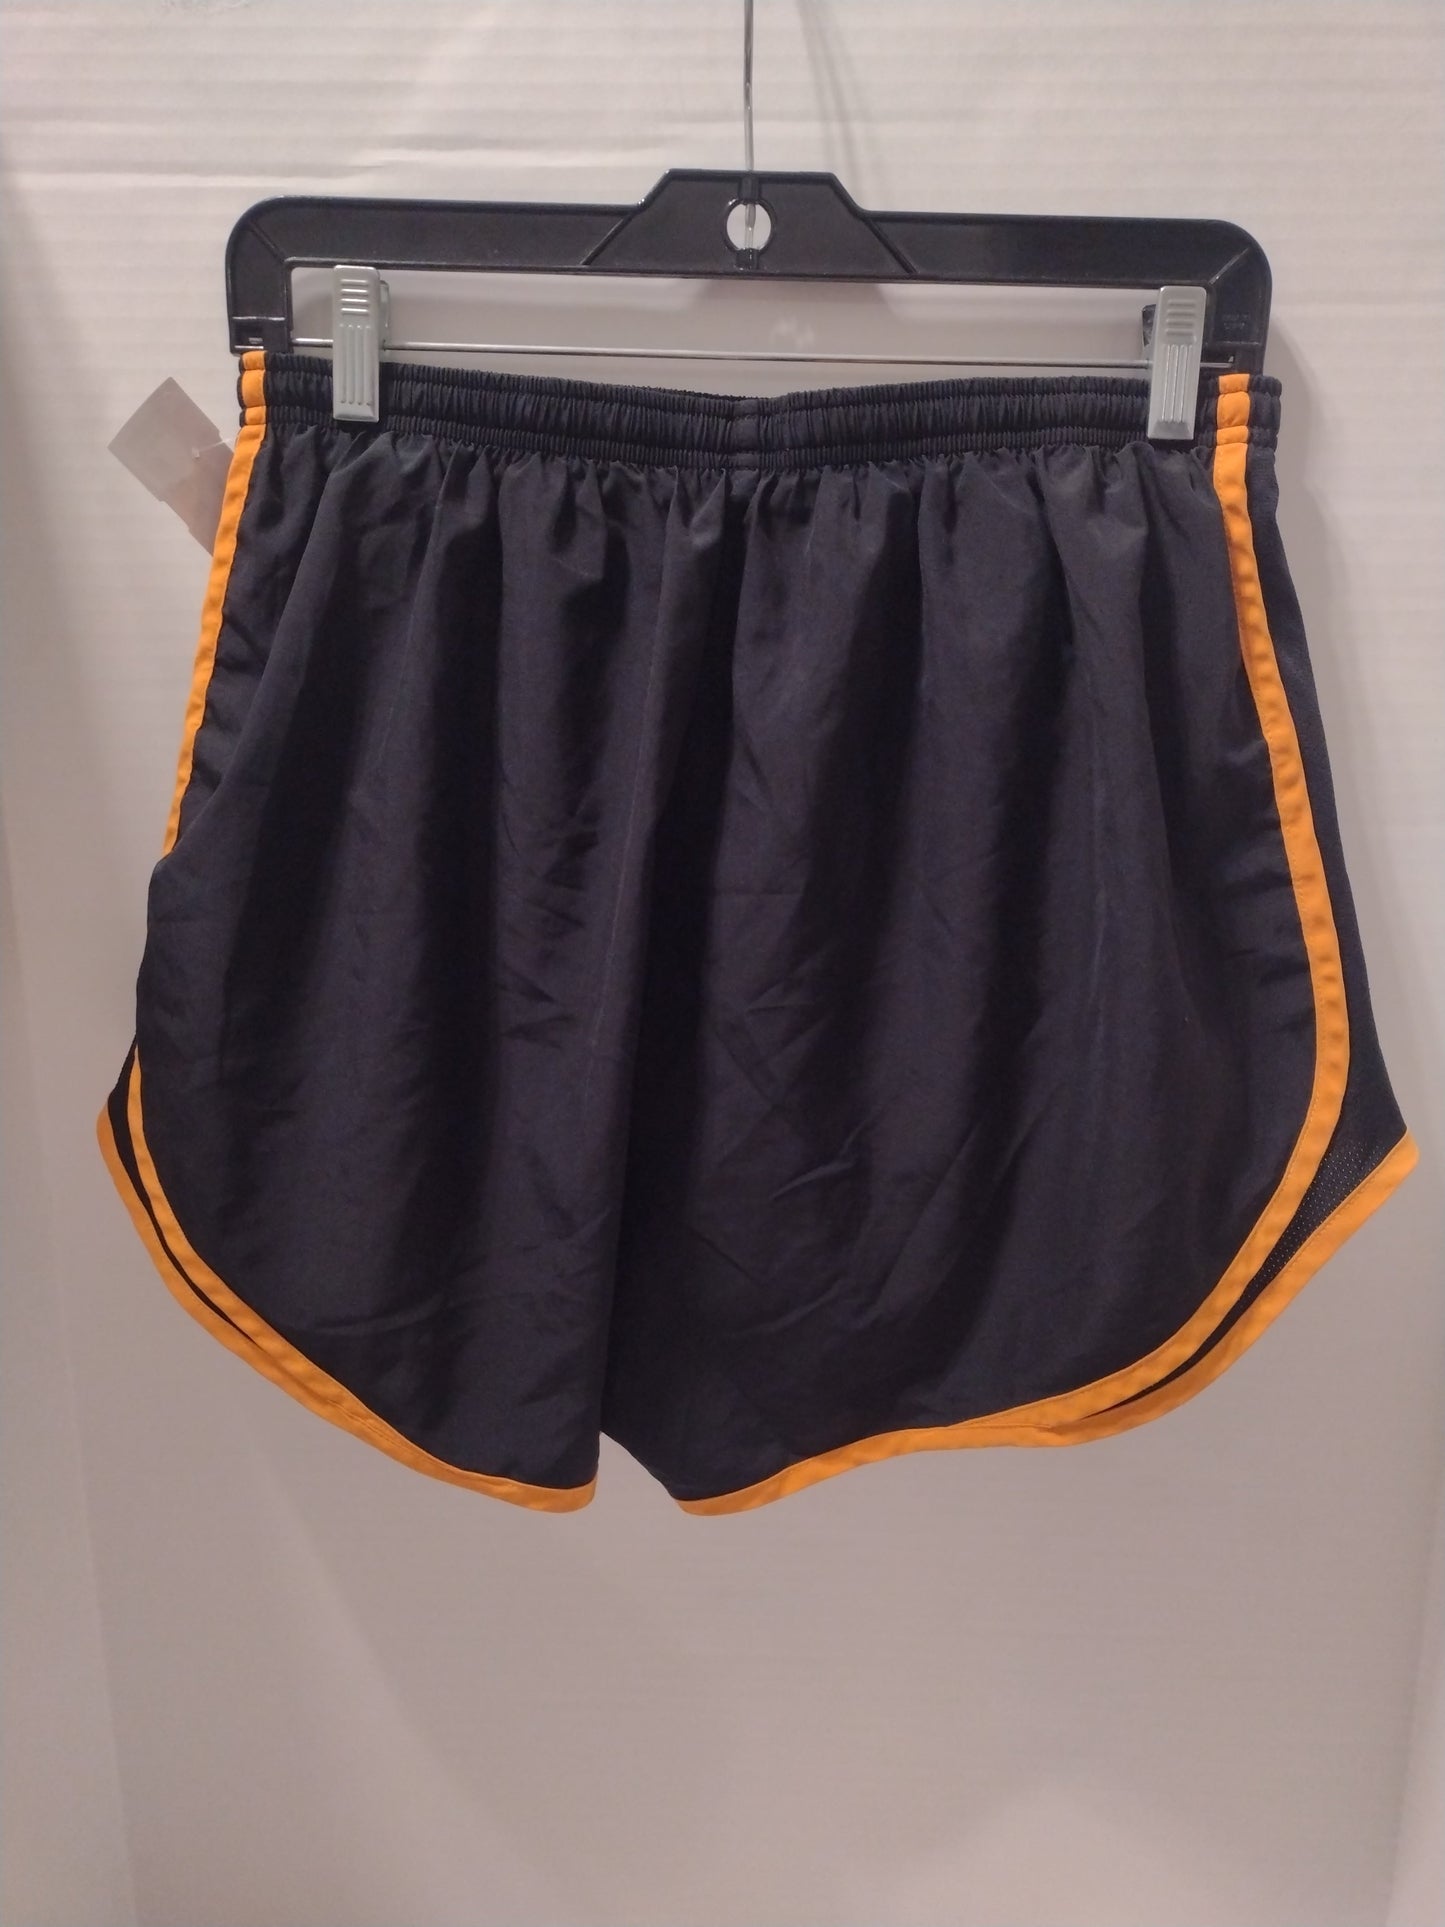 Athletic Shorts By Nike  Size: Xl